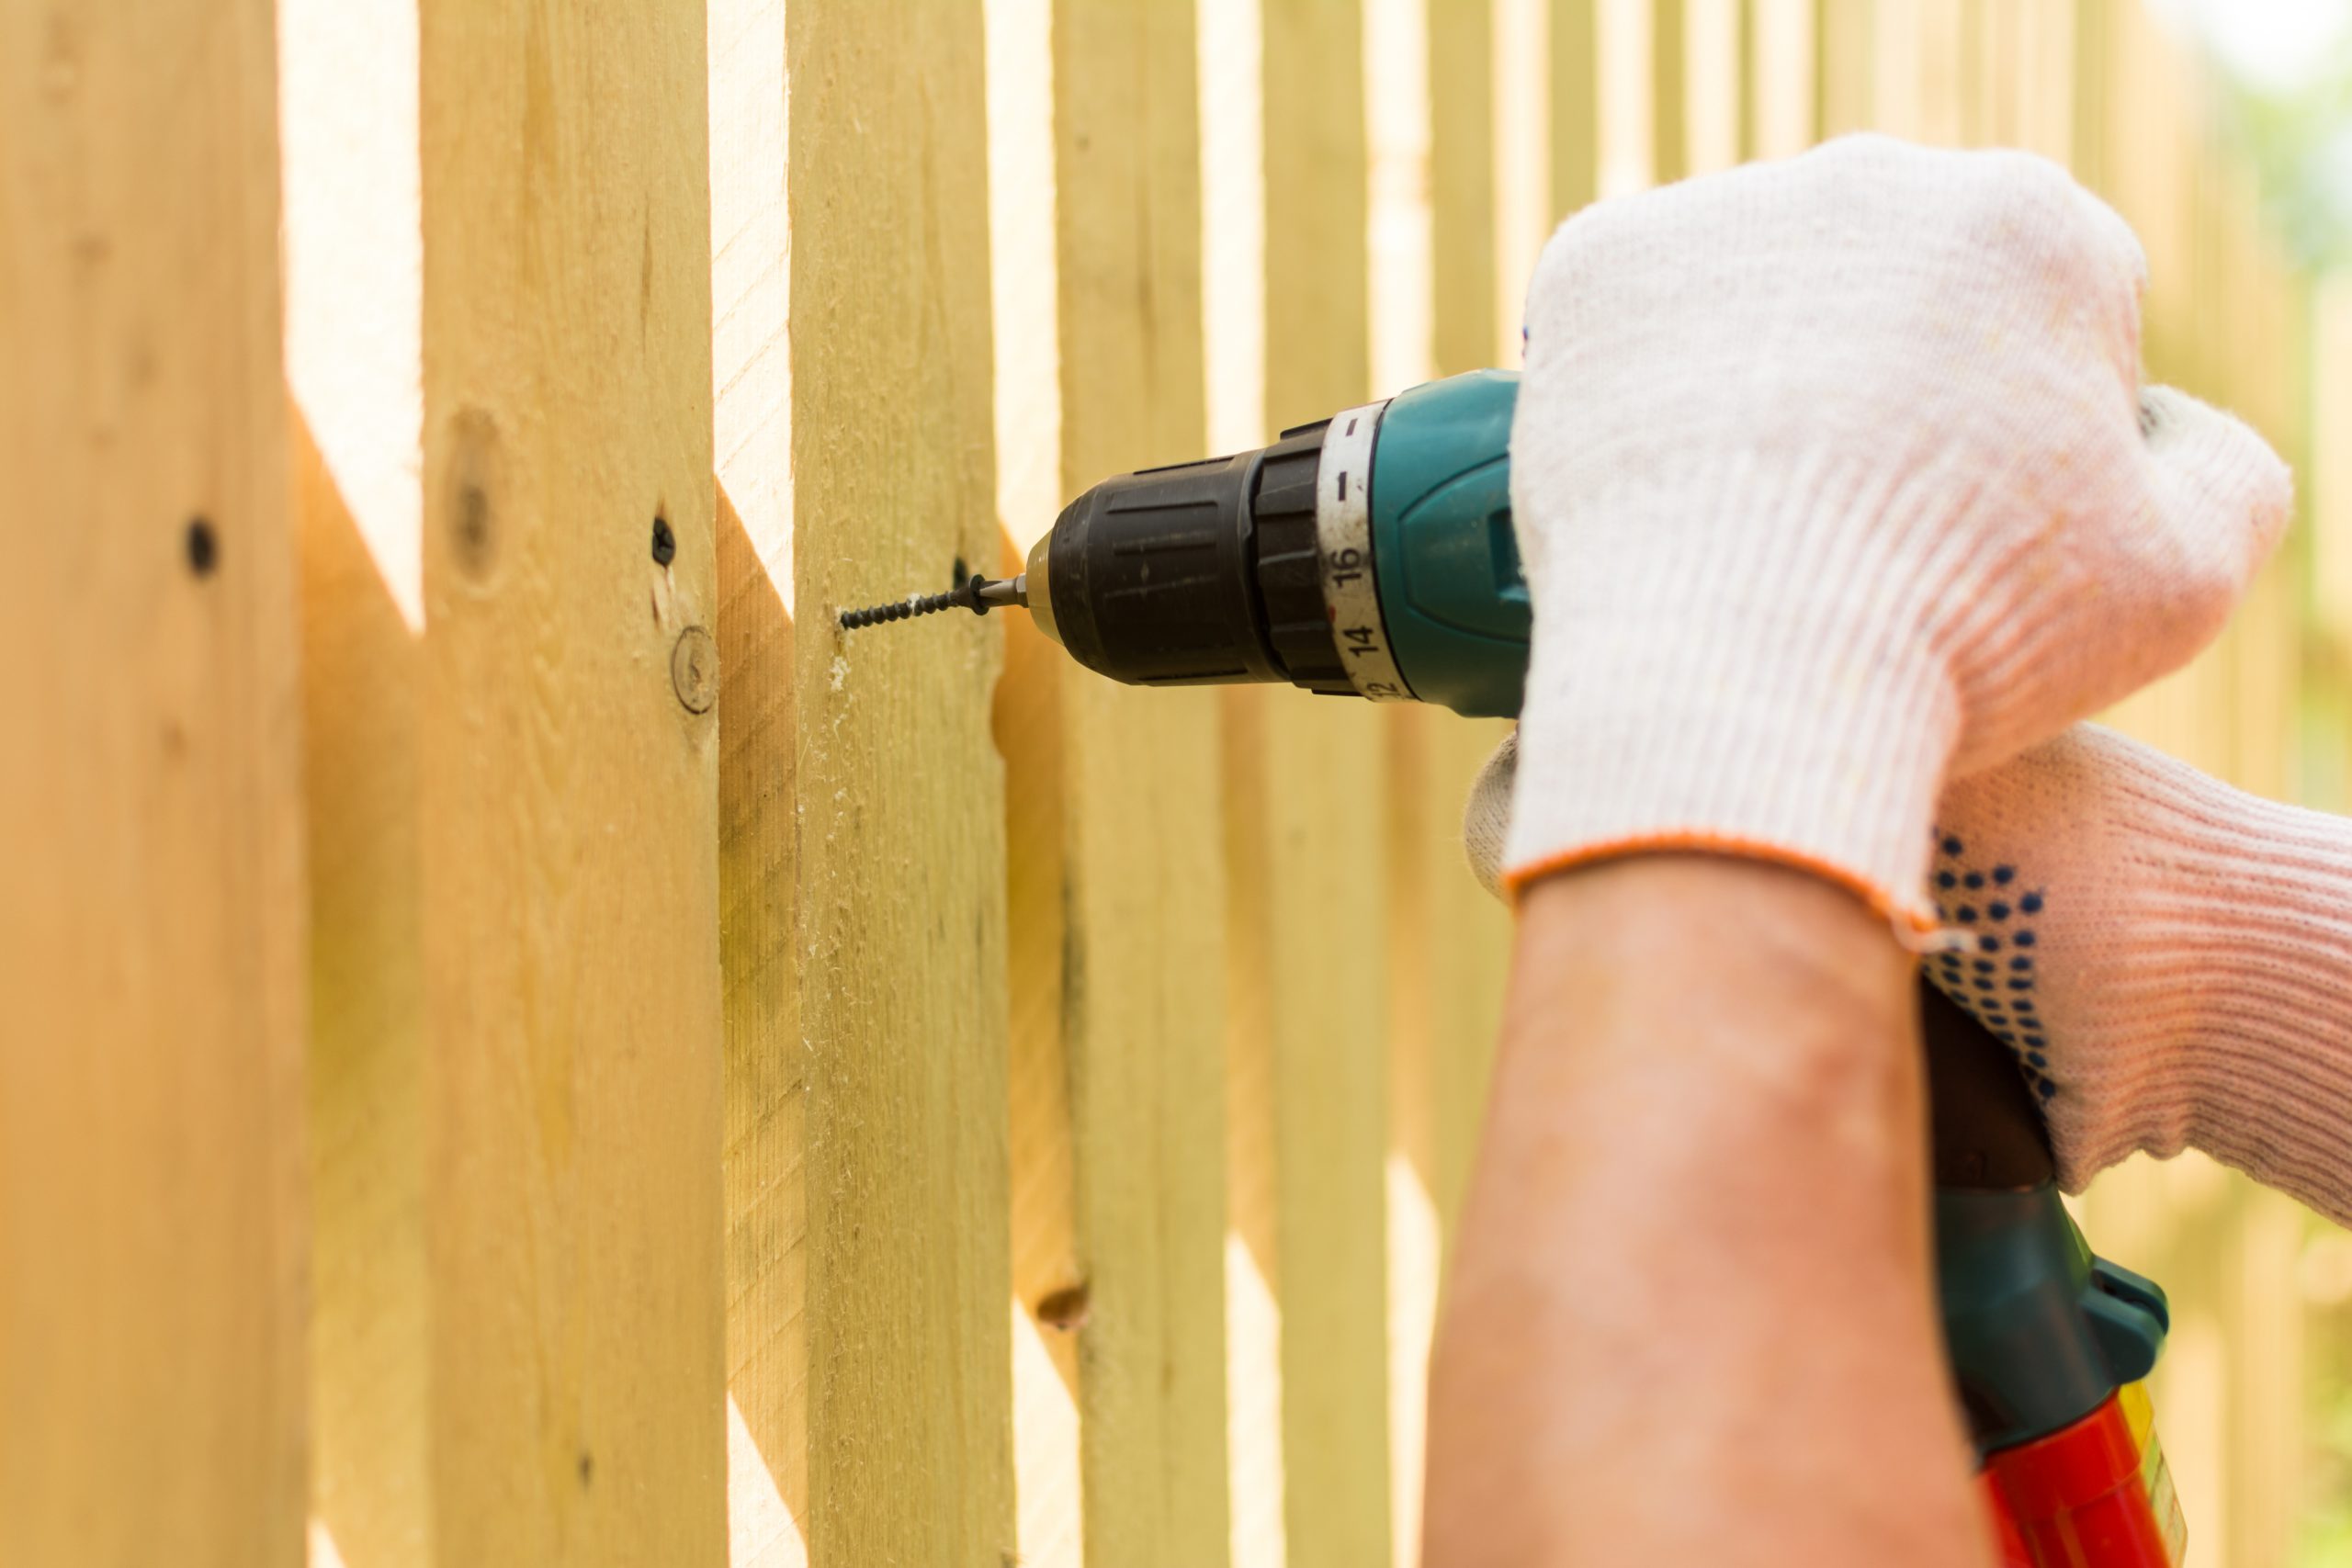 Hands of the carpenter holding electric screwdriver building a fence